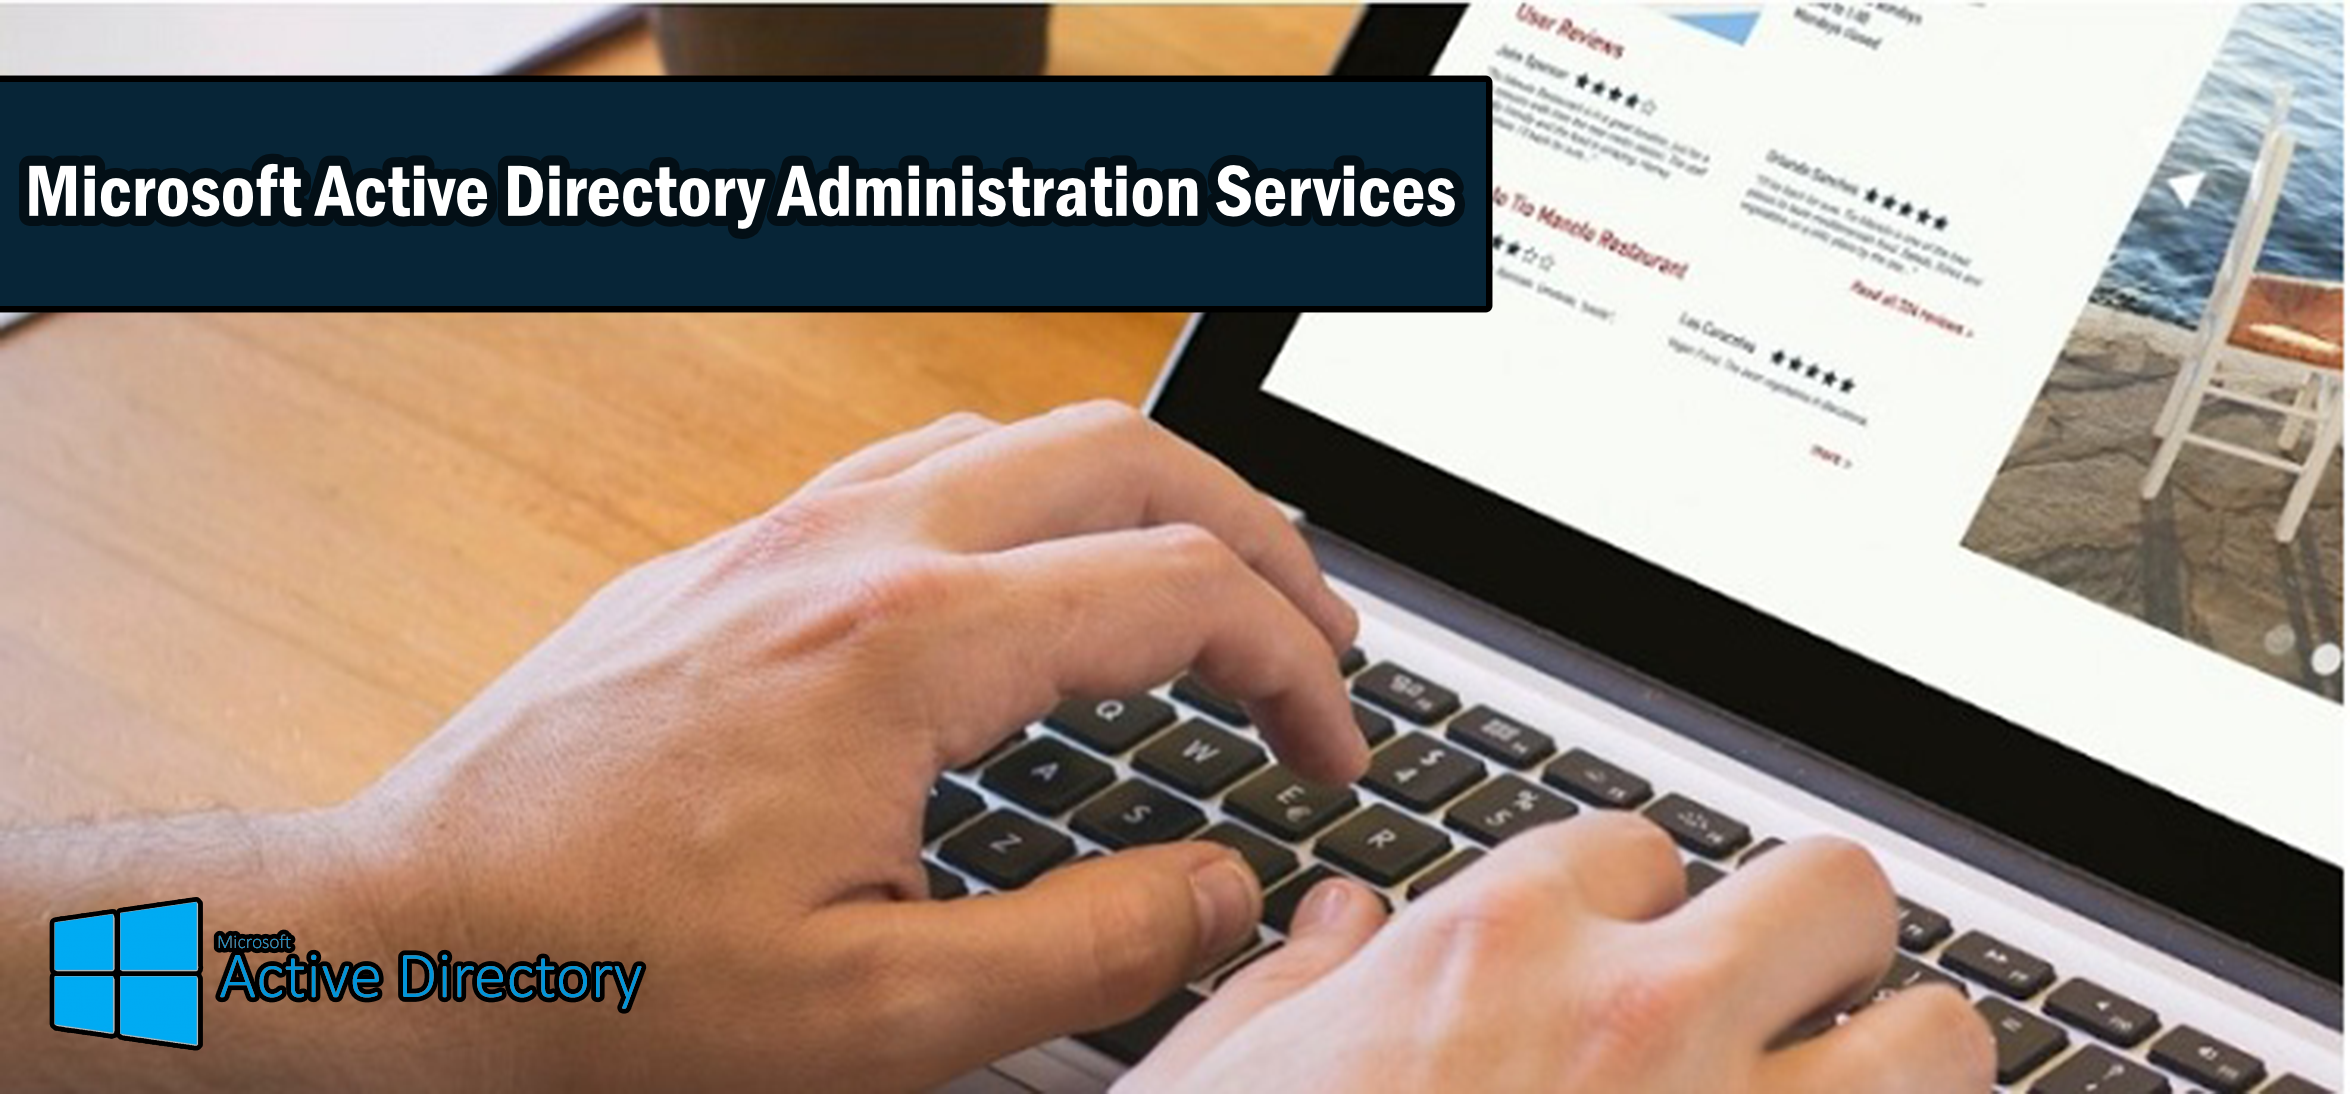 Microsoft Active Directory Administration Services in Borrego Springs CA, 92004